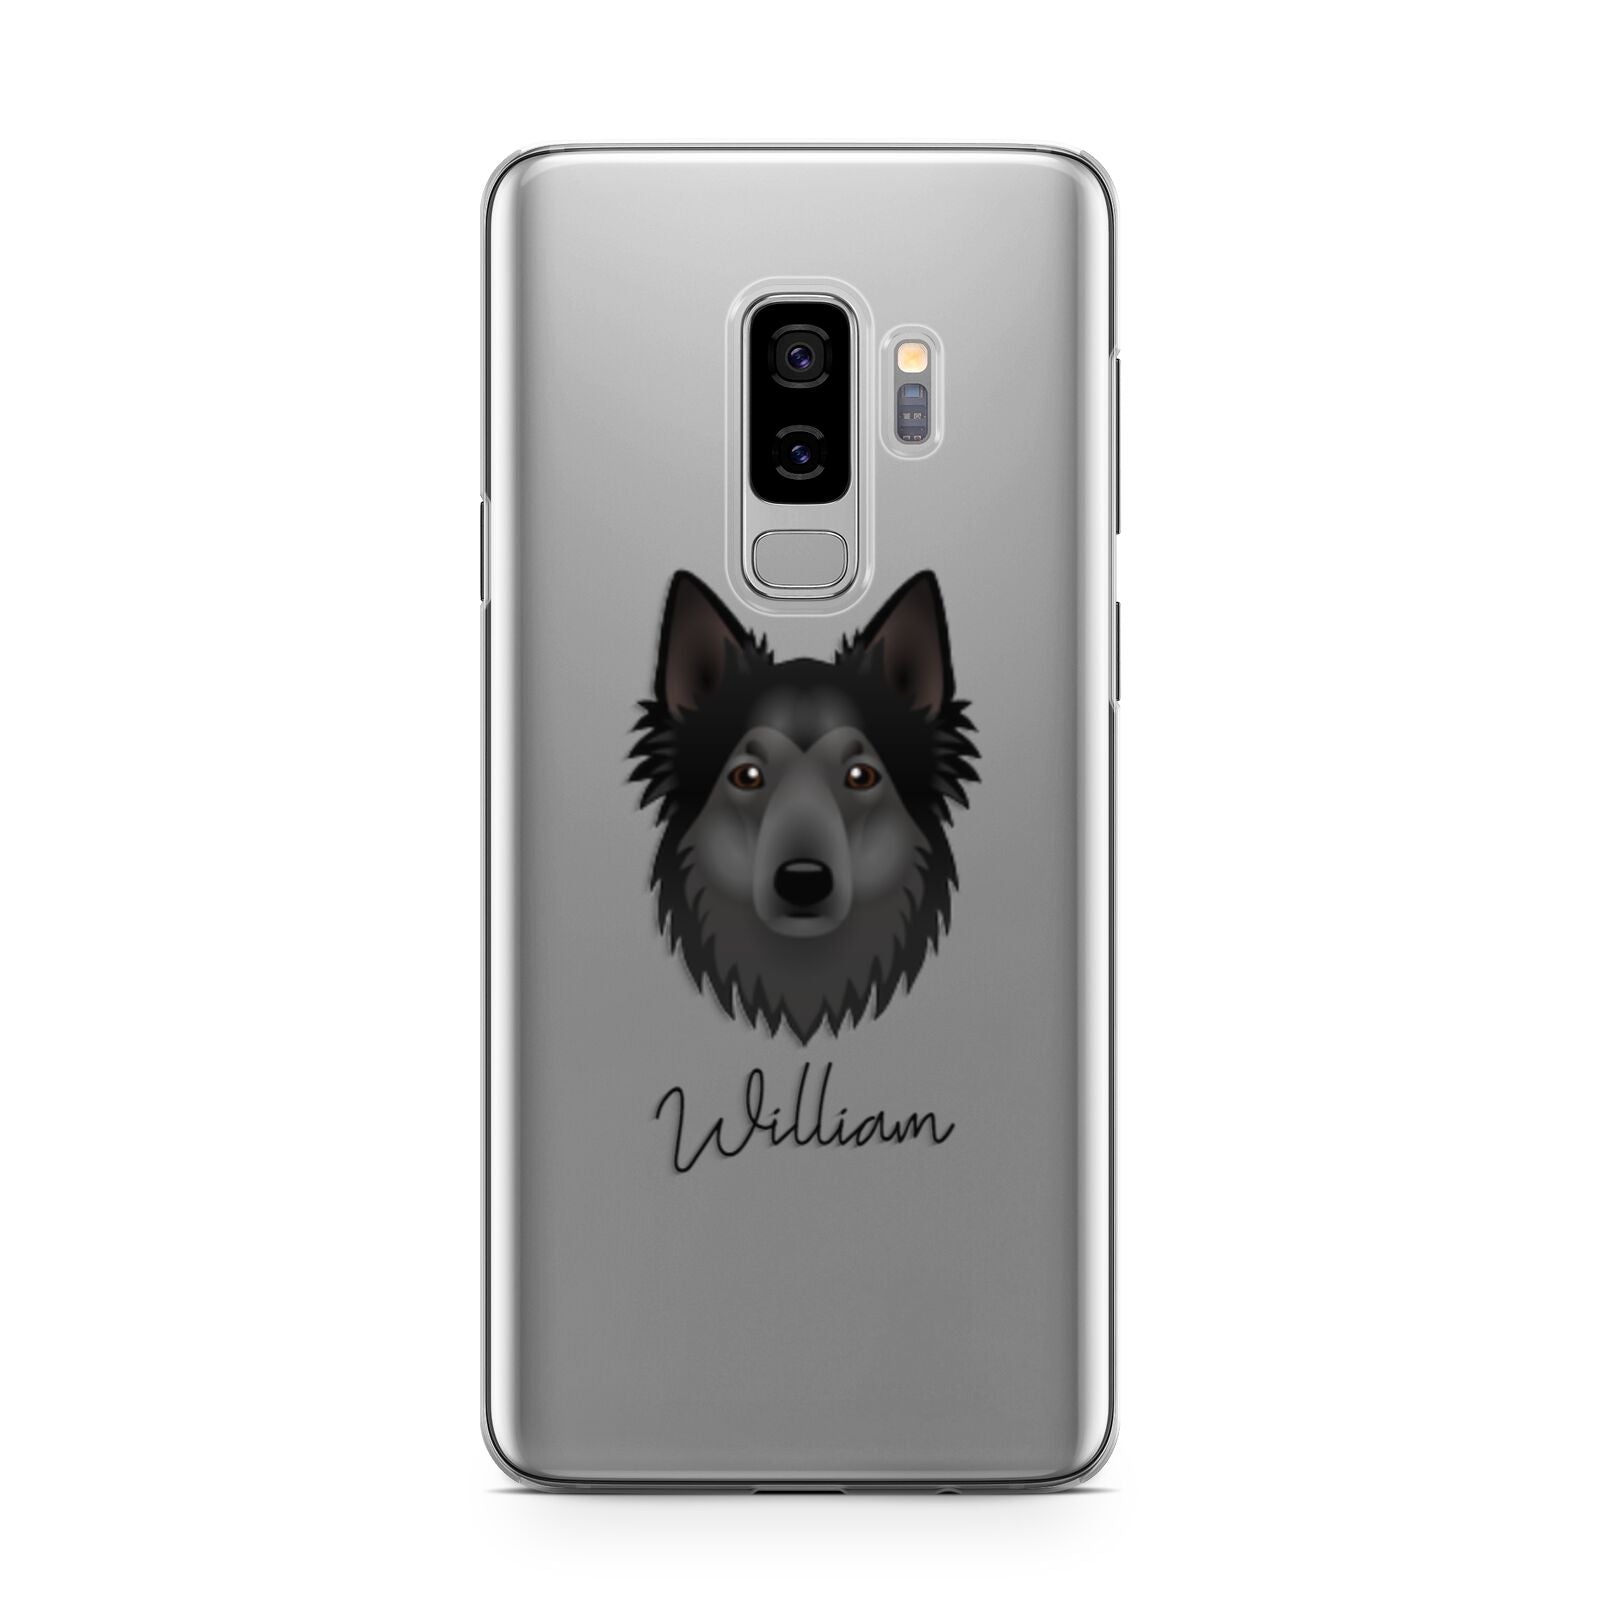 Shollie Personalised Samsung Galaxy S9 Plus Case on Silver phone